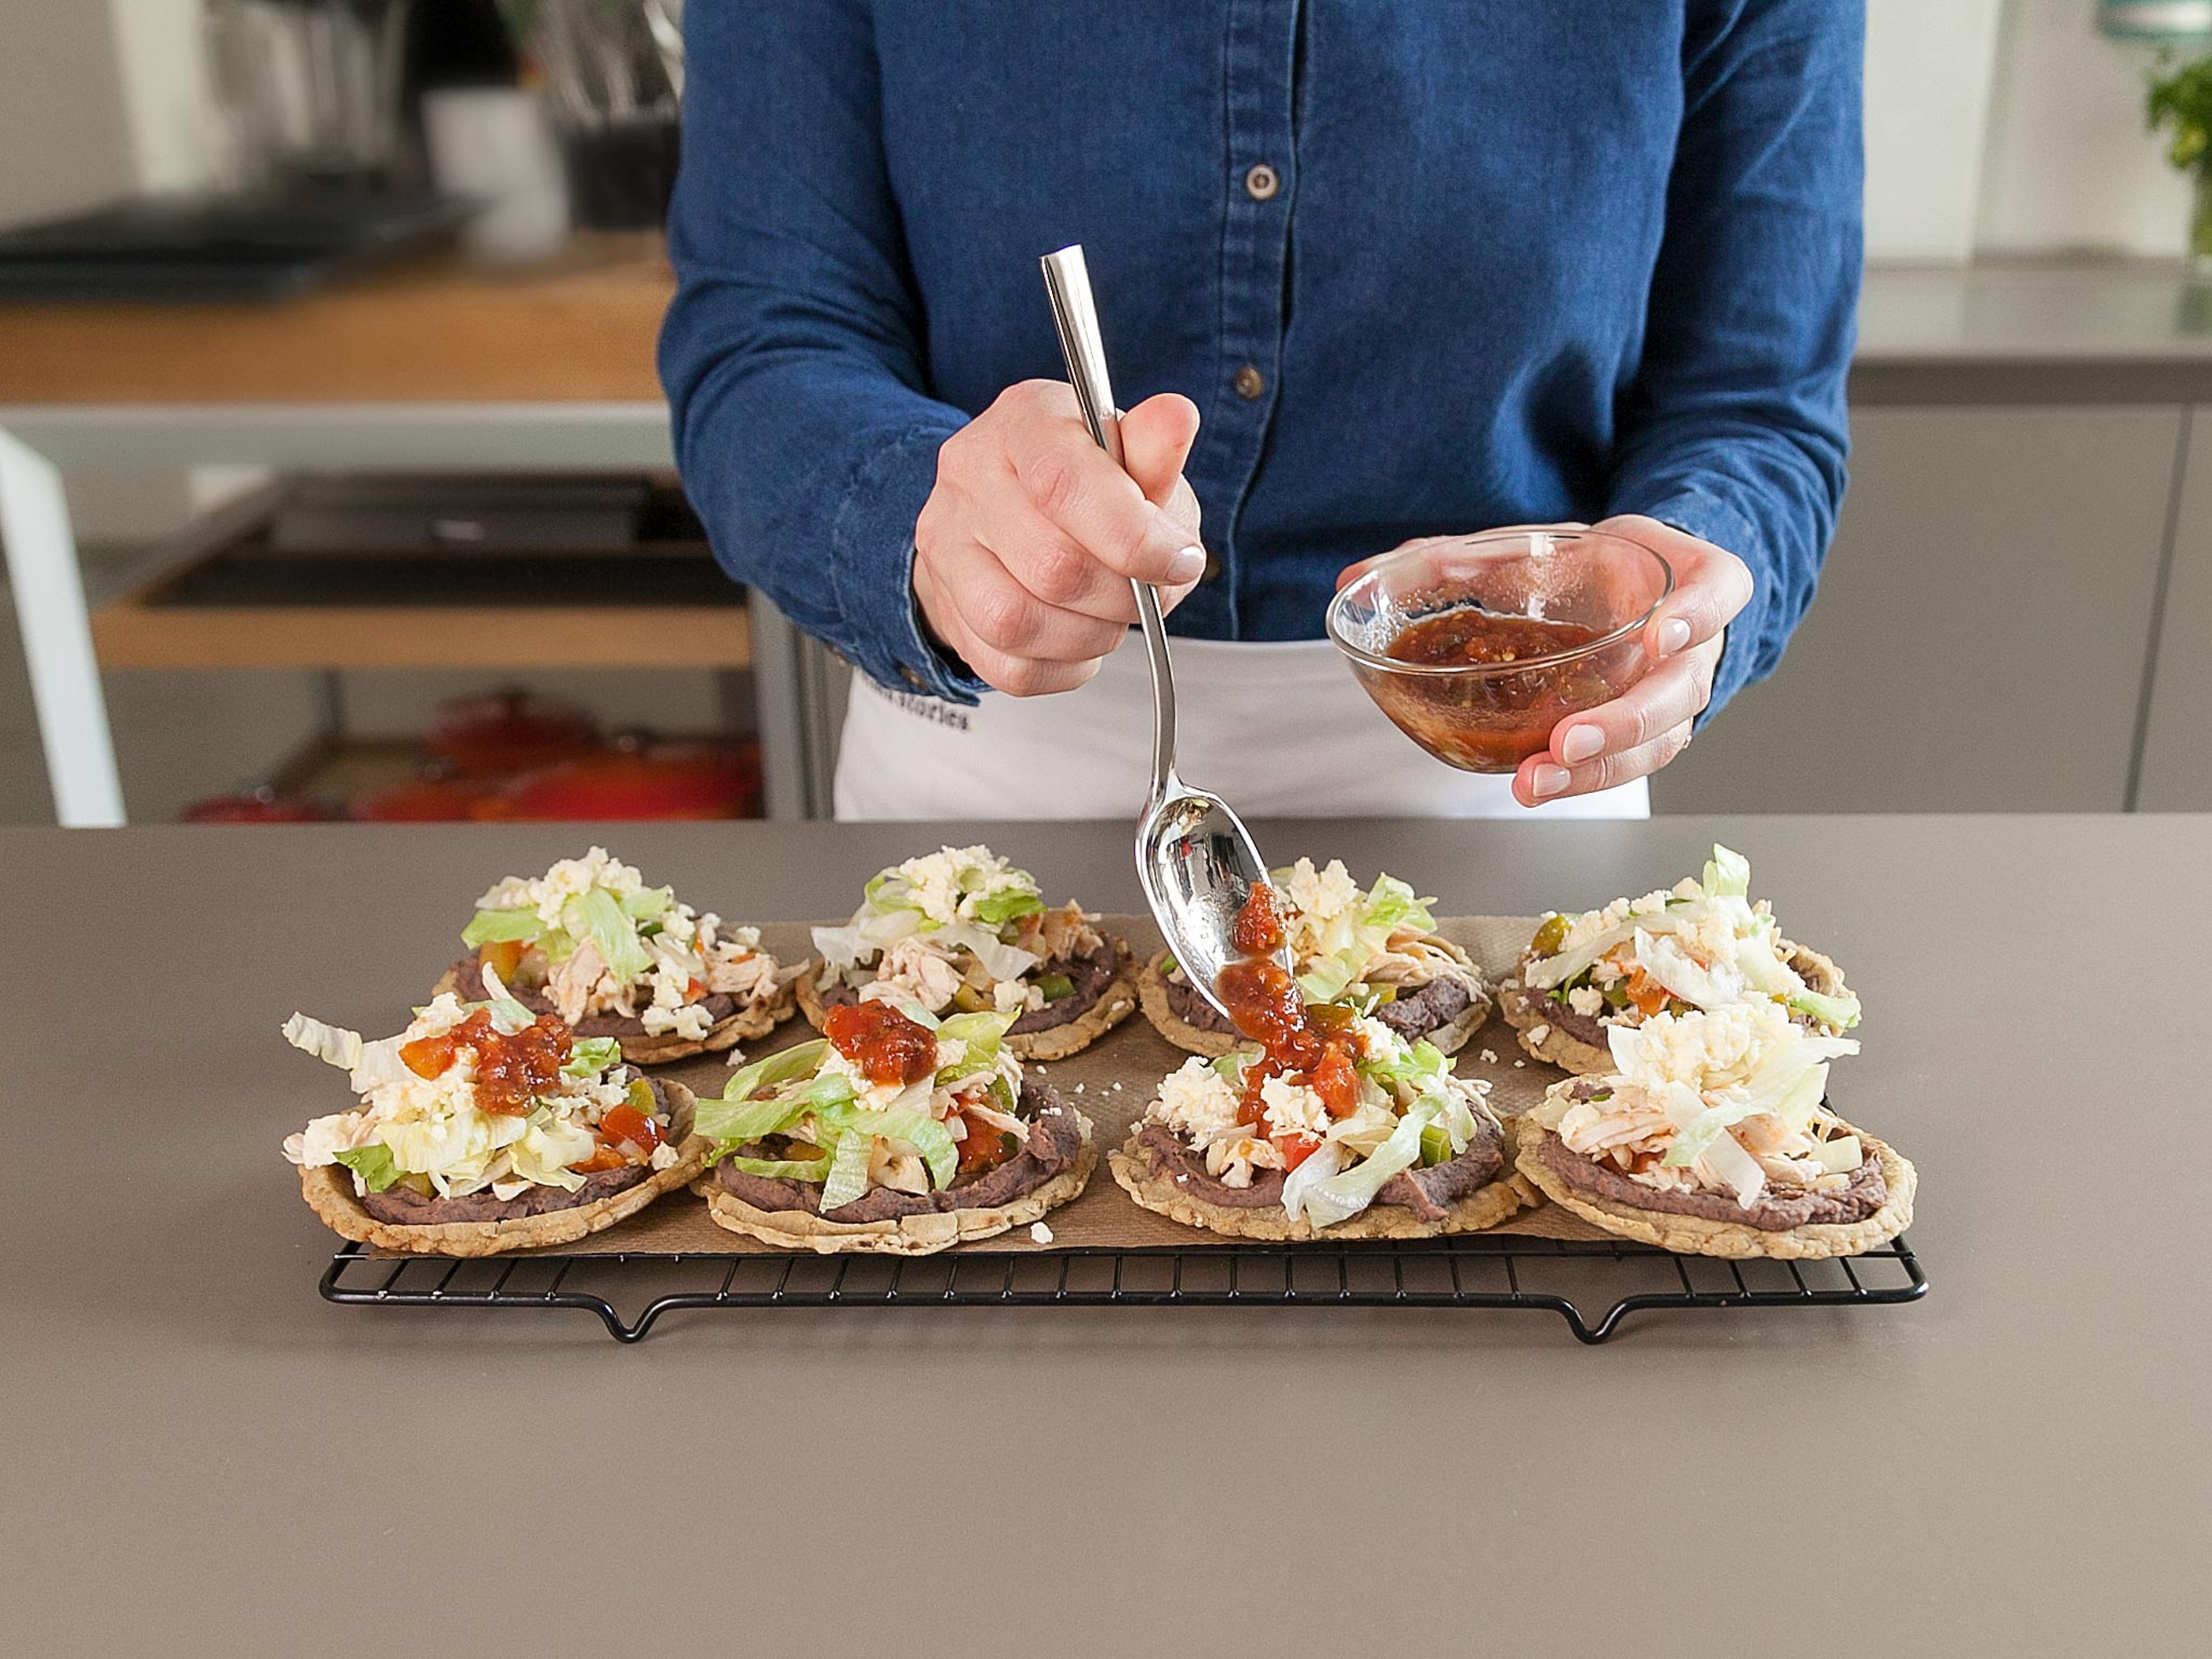 Top each sope with warm refried beans and the chicken and vegetable filling. Garnish with lettuce, grated queso fresco, and salsa to taste. Enjoy!